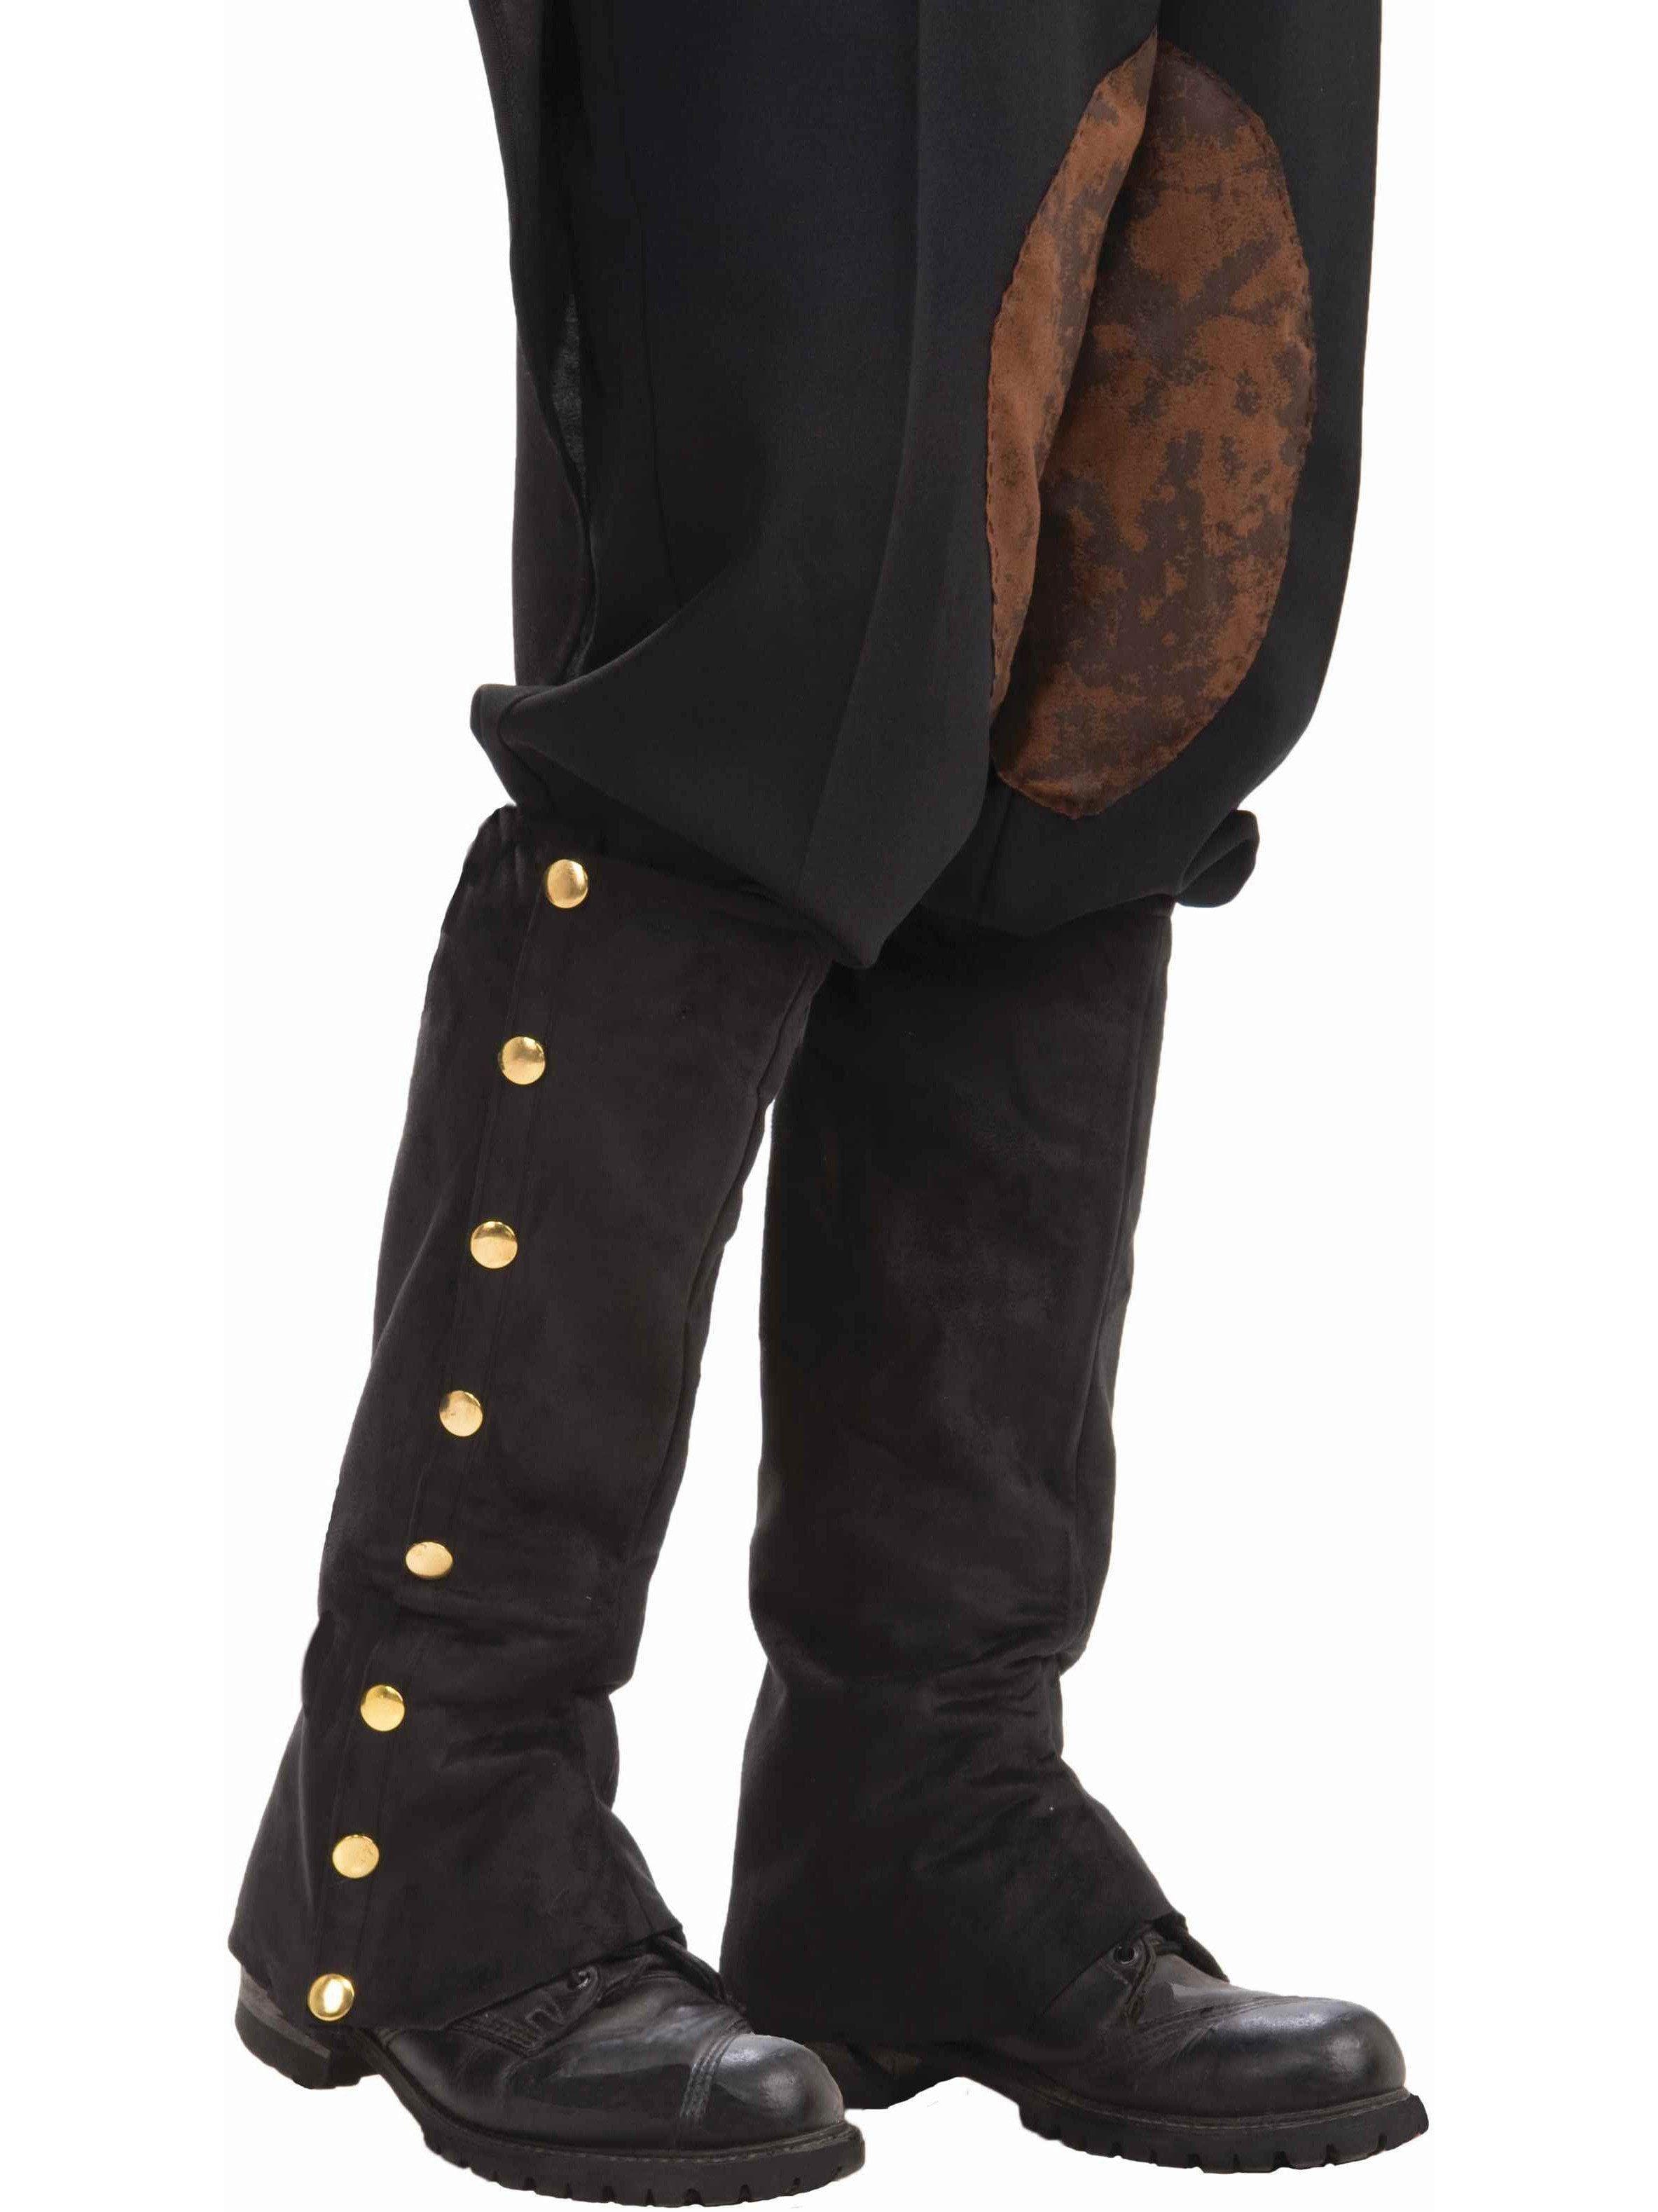 Adult Black Steampunk Gold Studded Spats - costumes.com